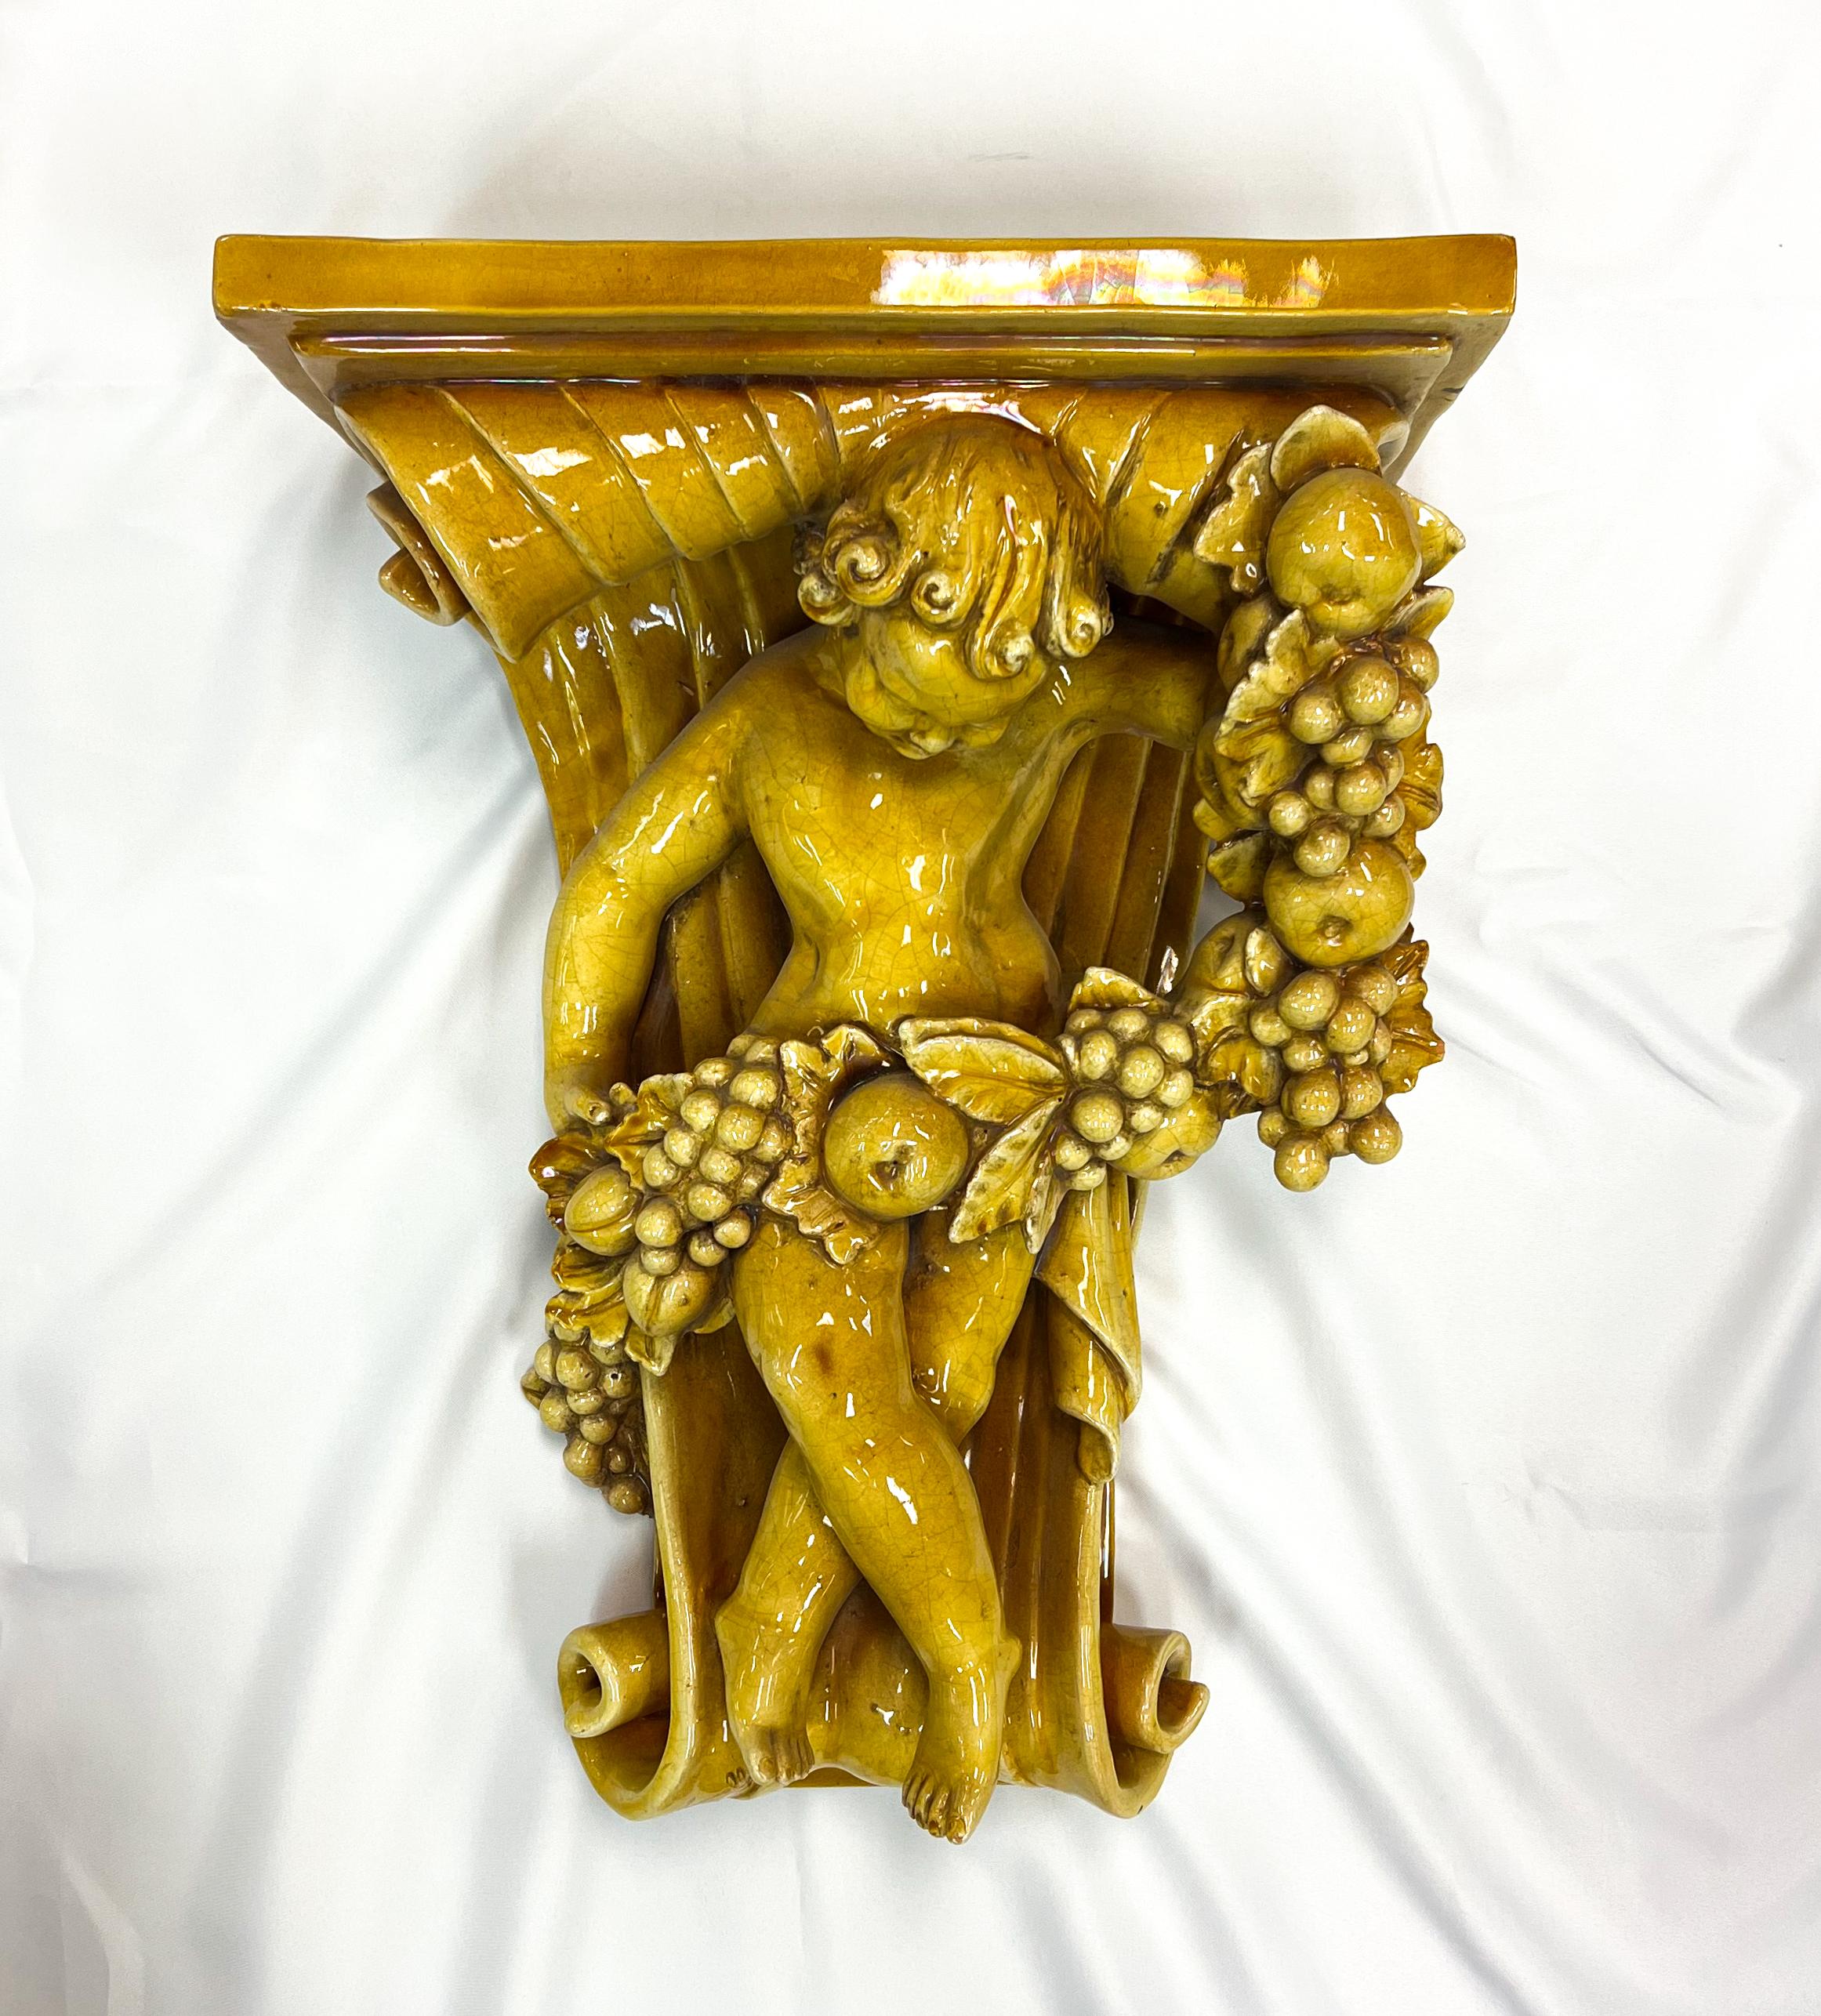 A handcrafted Italian glazed pottery putto wall bracket from the 1920s in mustard color and intricate details.

The putto, a cherubic figure holding a vine of fruits, showcases the artistry and craftsmanship of the Italian potter. The choice of